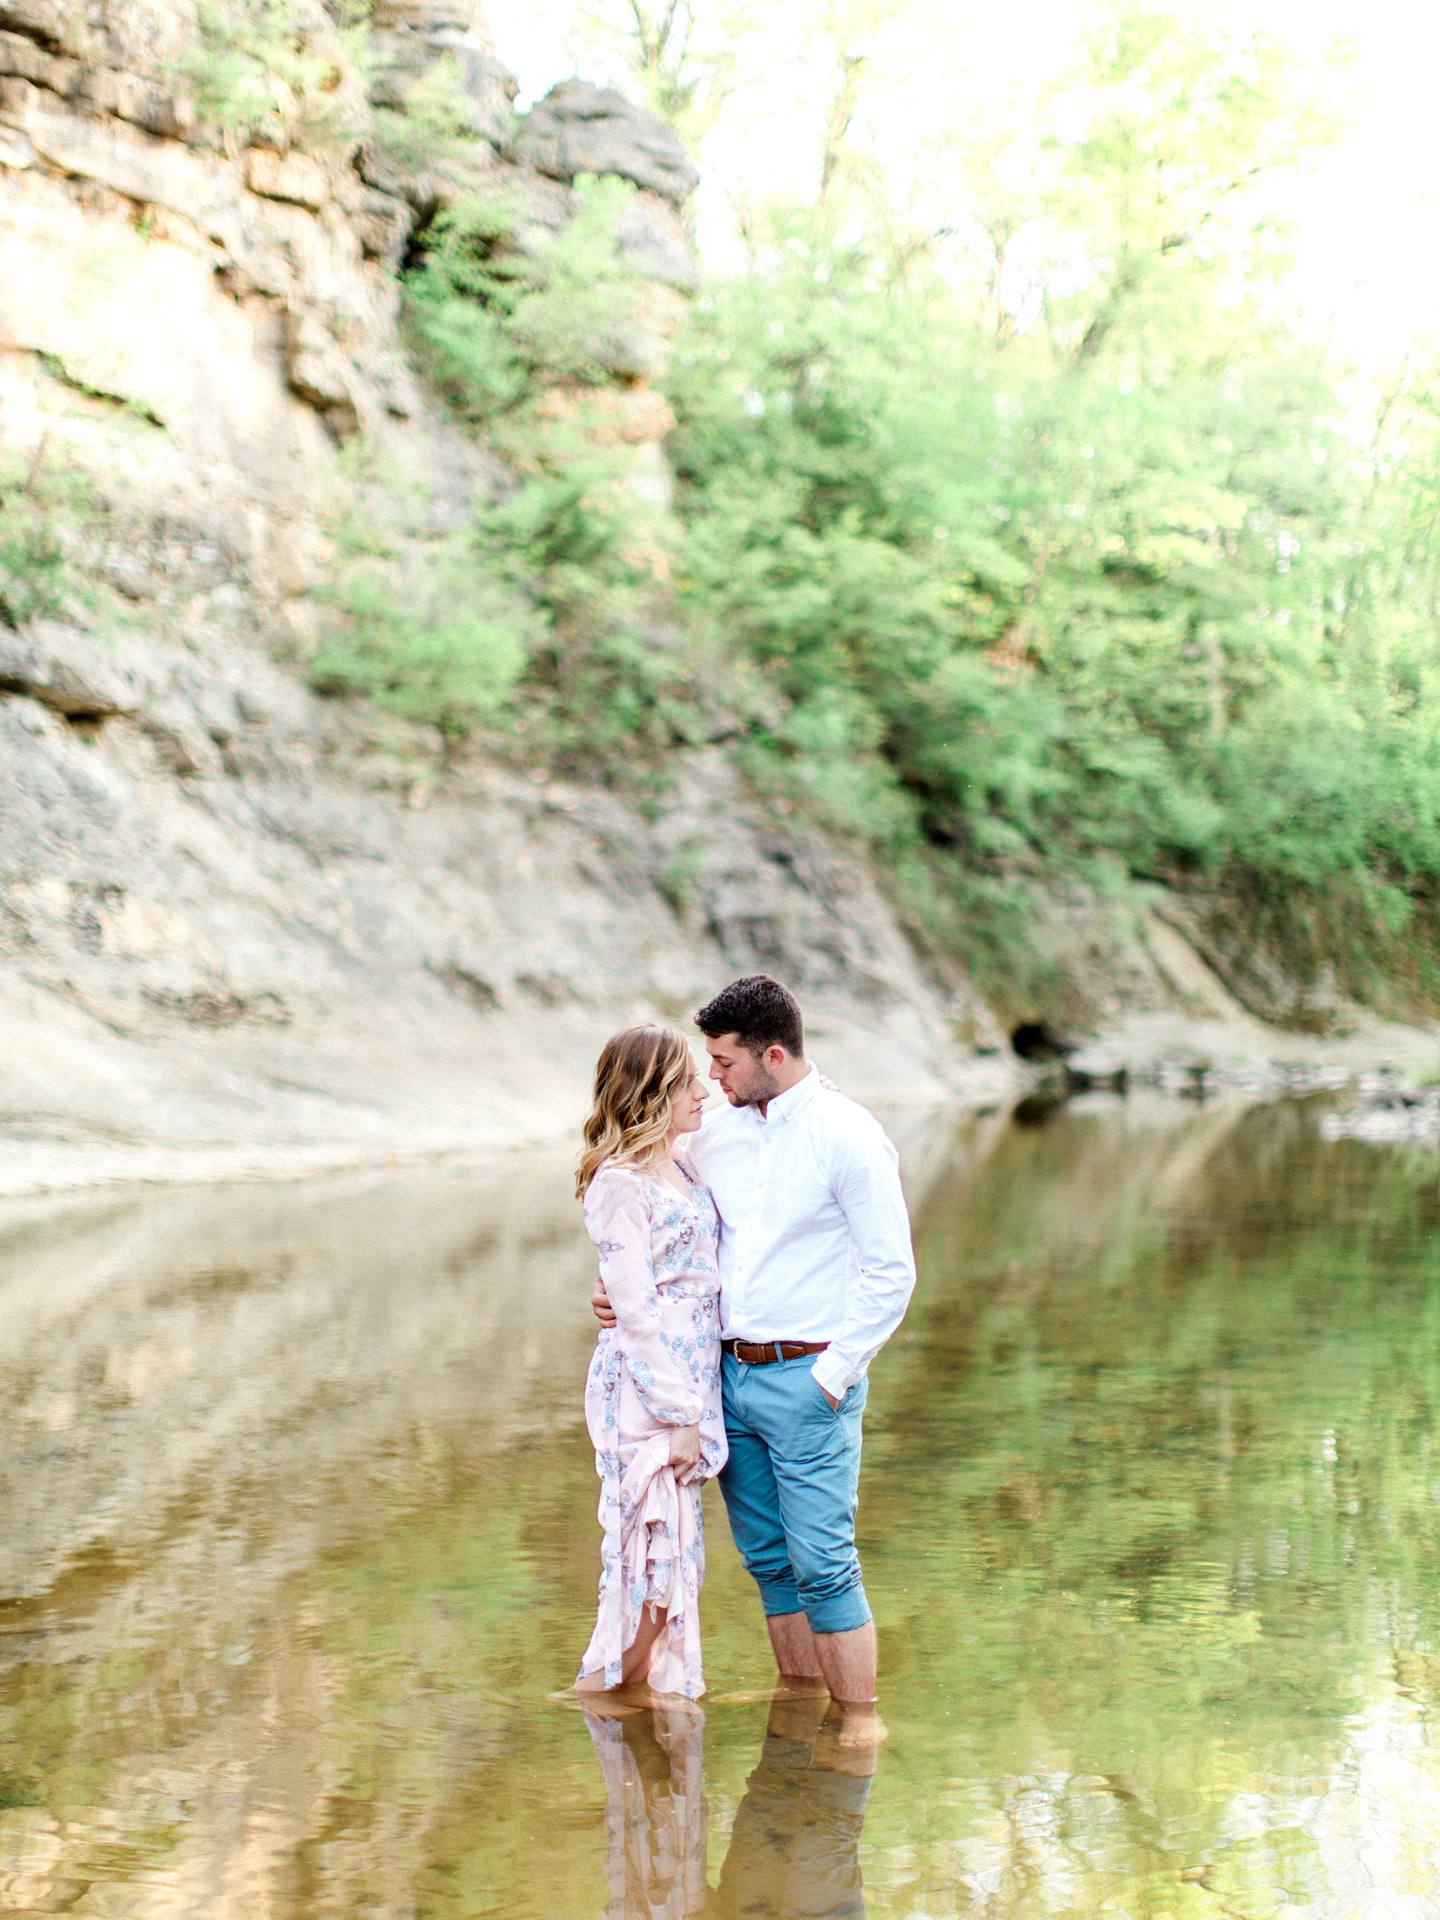 pinnacles bluff top engagement, engagement session columbia missouri, missouri engagement photographer, love tree studios, pinnacles youth park, creek engagement session, columbia missouri engagement session bluffs, missouri film photographer, fine art film photographer, columbia missouri anniversary session